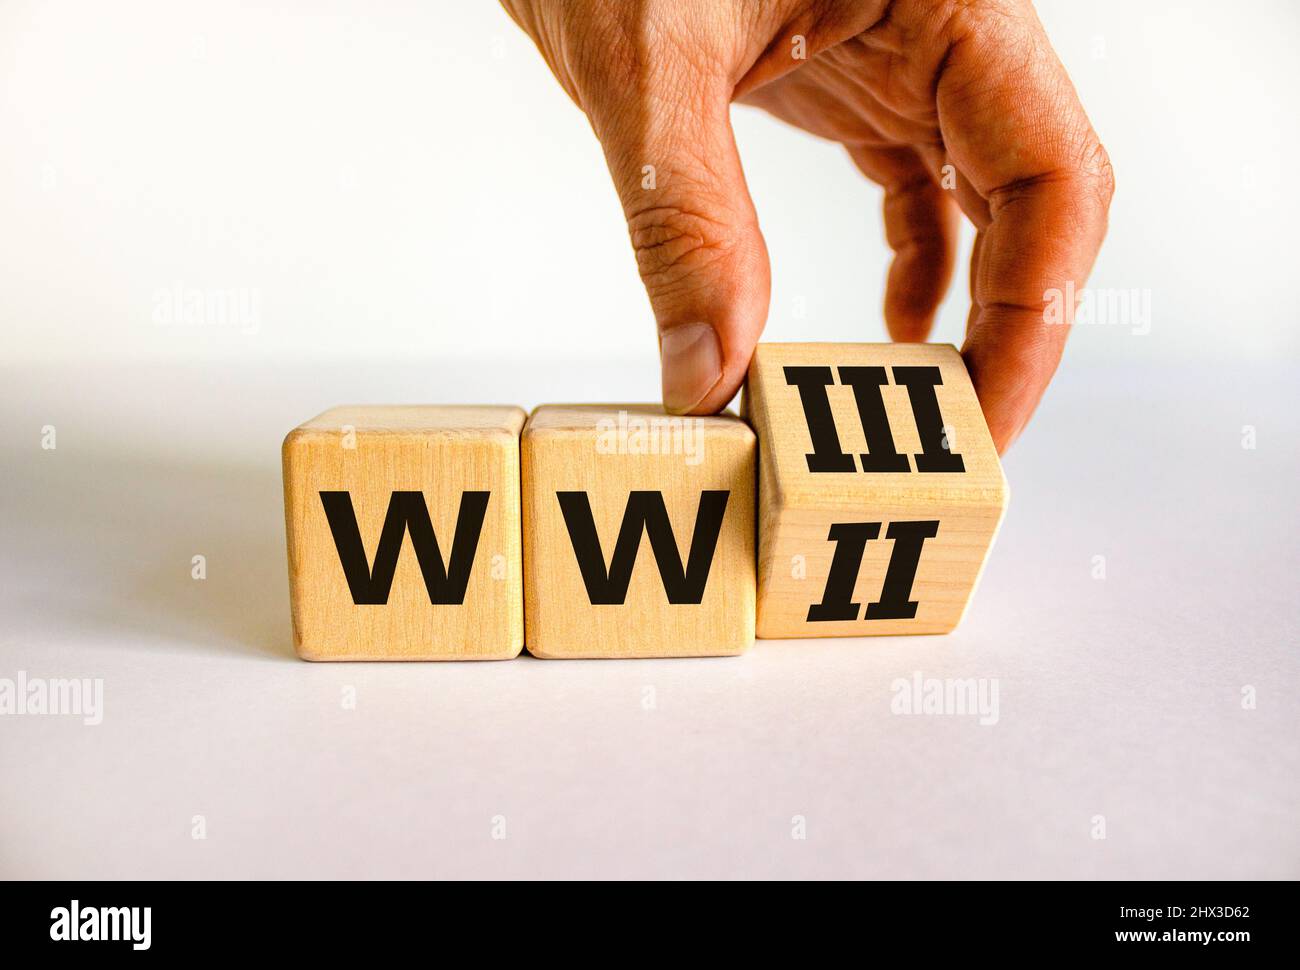 WW3 world war 3 symbol. Businessman turns the wooden cube and changes the concept word WW2 to WW3. Beautiful white table white background, copy space. Stock Photo